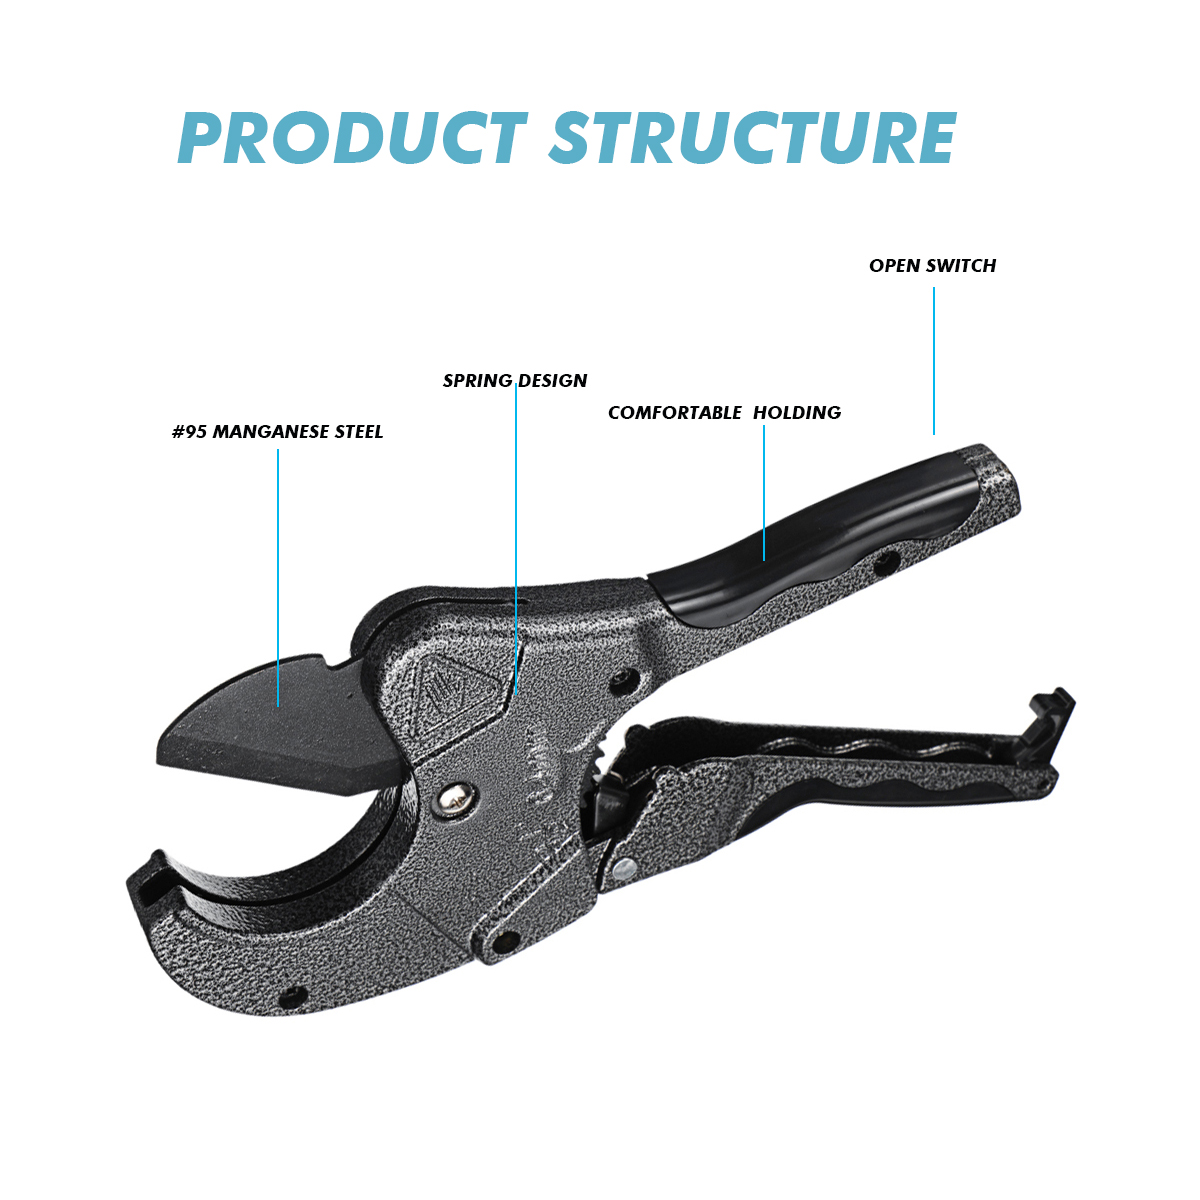 Aluminum-Alloy-Portable-PVC-PPR-Pipe-Cutter-Hose-Ratchet-Action-Up-To-63mm-Tube-1869999-3